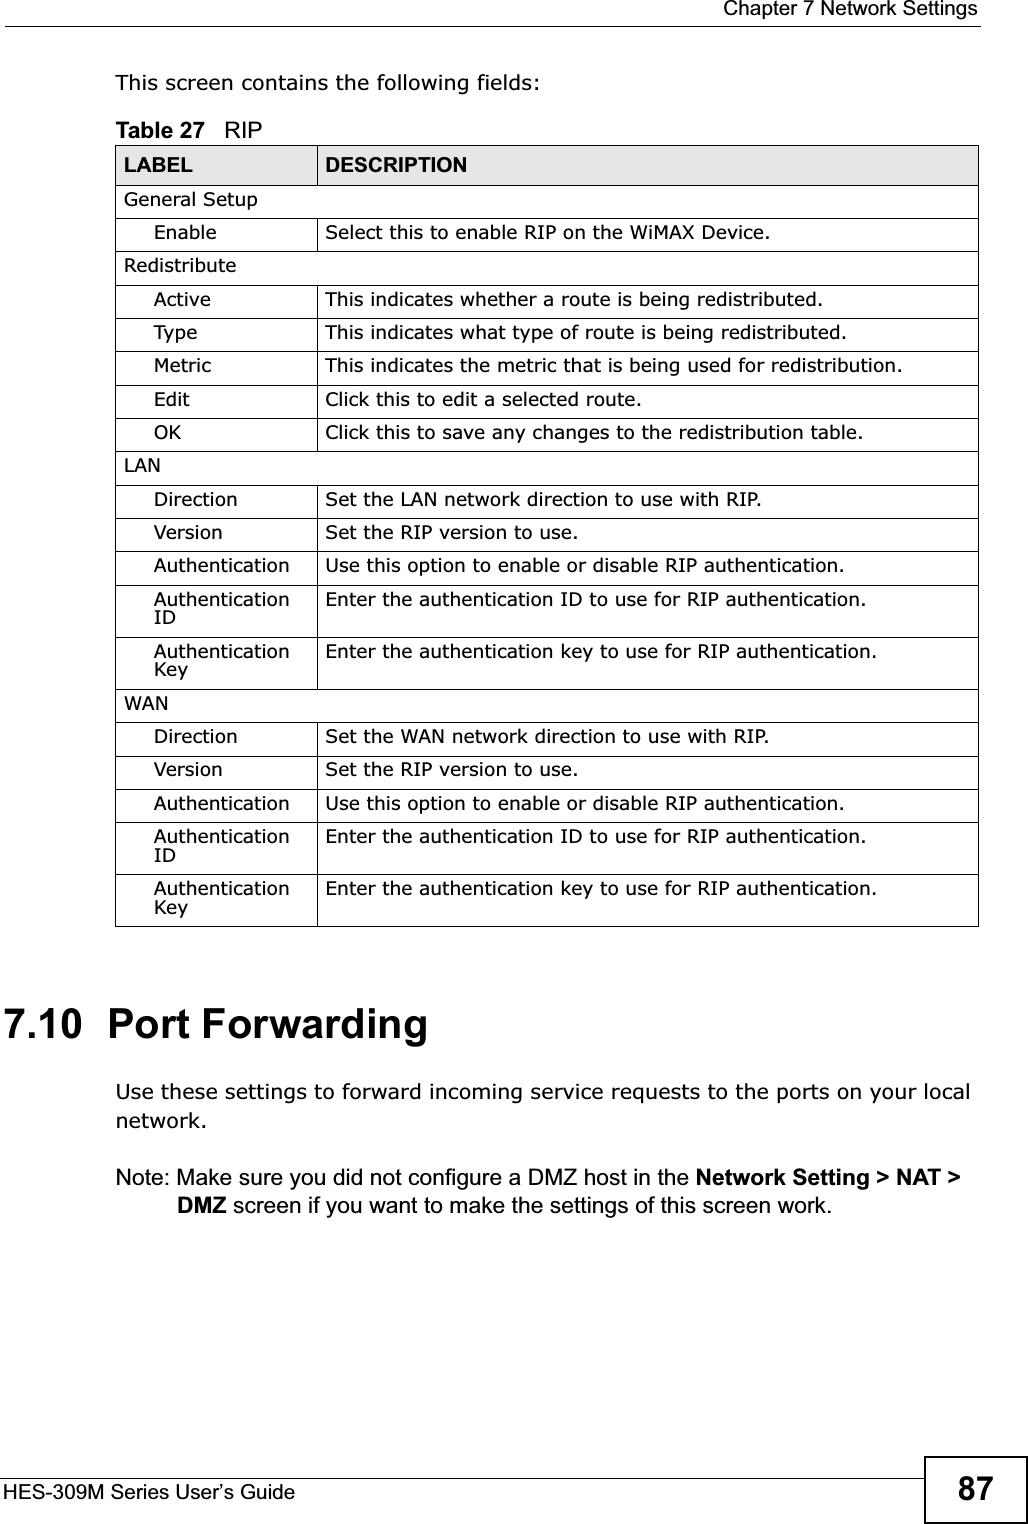  Chapter 7 Network SettingsHES-309M Series User’s Guide 87This screen contains the following fields:7.10  Port ForwardingUse these settings to forward incoming service requests to the ports on your local network.Note: Make sure you did not configure a DMZ host in the Network Setting &gt; NAT &gt; DMZ screen if you want to make the settings of this screen work.Table 27   RIPLABEL DESCRIPTIONGeneral SetupEnable Select this to enable RIP on the WiMAX Device.RedistributeActive This indicates whether a route is being redistributed.Type This indicates what type of route is being redistributed.Metric This indicates the metric that is being used for redistribution.Edit Click this to edit a selected route.OK Click this to save any changes to the redistribution table.LANDirection Set the LAN network direction to use with RIP.Version Set the RIP version to use.Authentication Use this option to enable or disable RIP authentication.Authentication ID Enter the authentication ID to use for RIP authentication.Authentication Key Enter the authentication key to use for RIP authentication.WANDirection Set the WAN network direction to use with RIP.Version Set the RIP version to use.Authentication Use this option to enable or disable RIP authentication.Authentication ID Enter the authentication ID to use for RIP authentication.Authentication Key Enter the authentication key to use for RIP authentication.